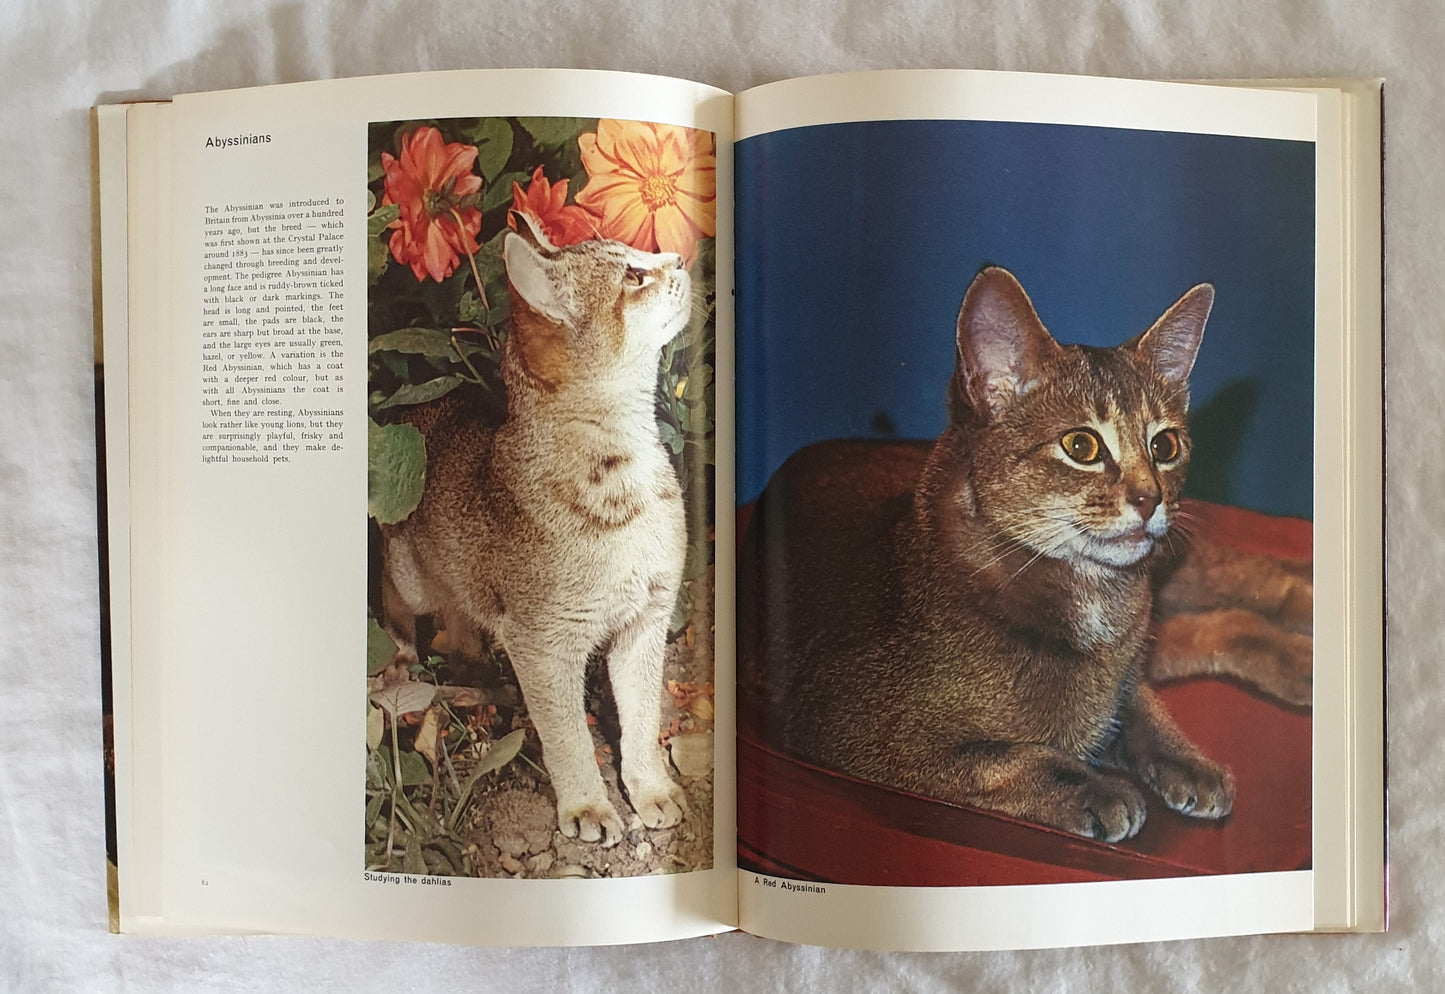 The World of Cats by John Montgomery